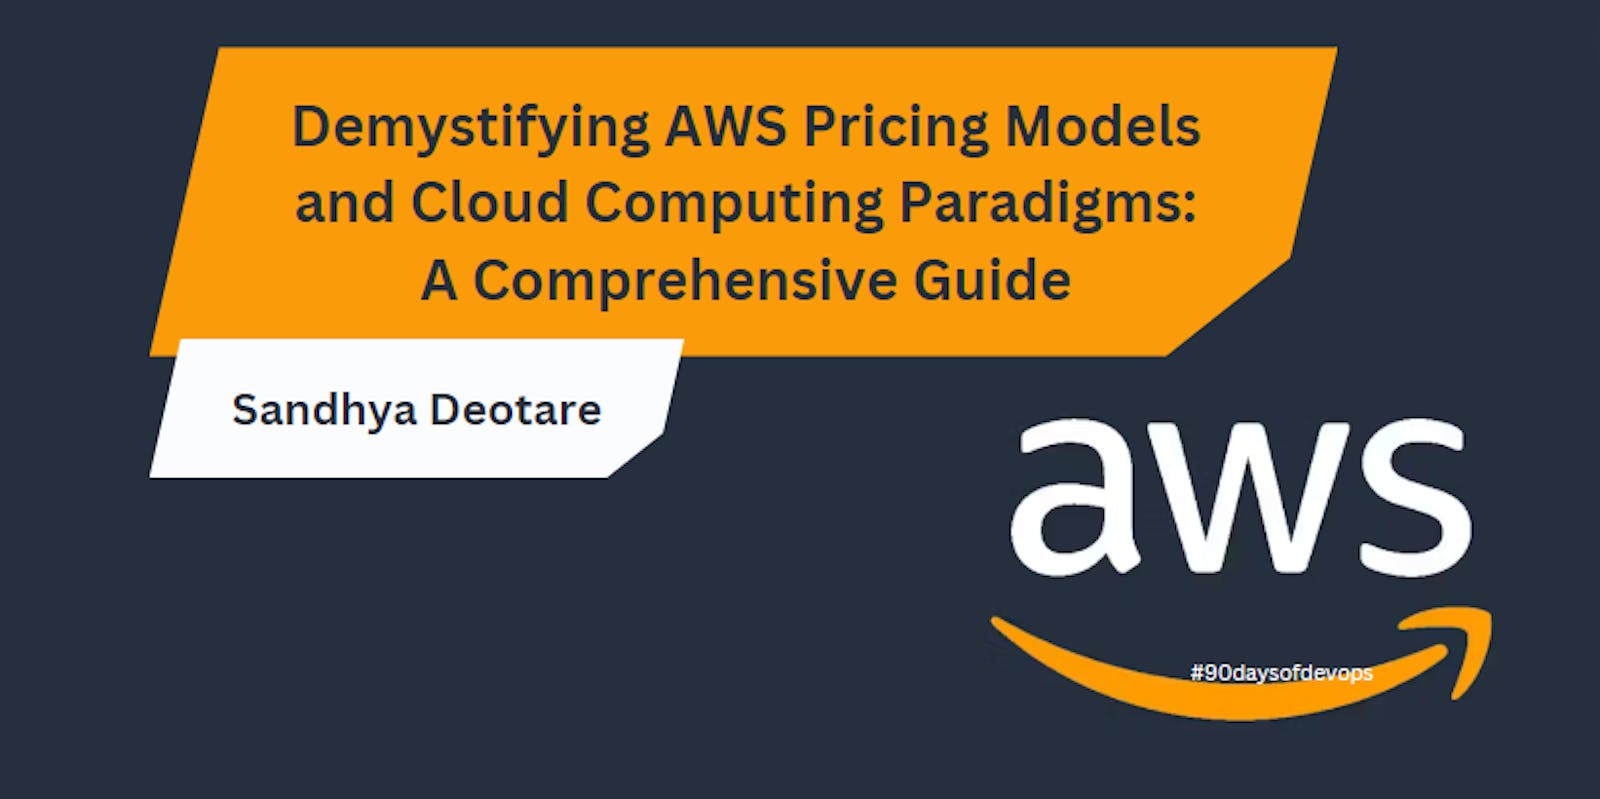 Demystifying AWS Pricing Models and Cloud Computing Paradigms: A Comprehensive Guide